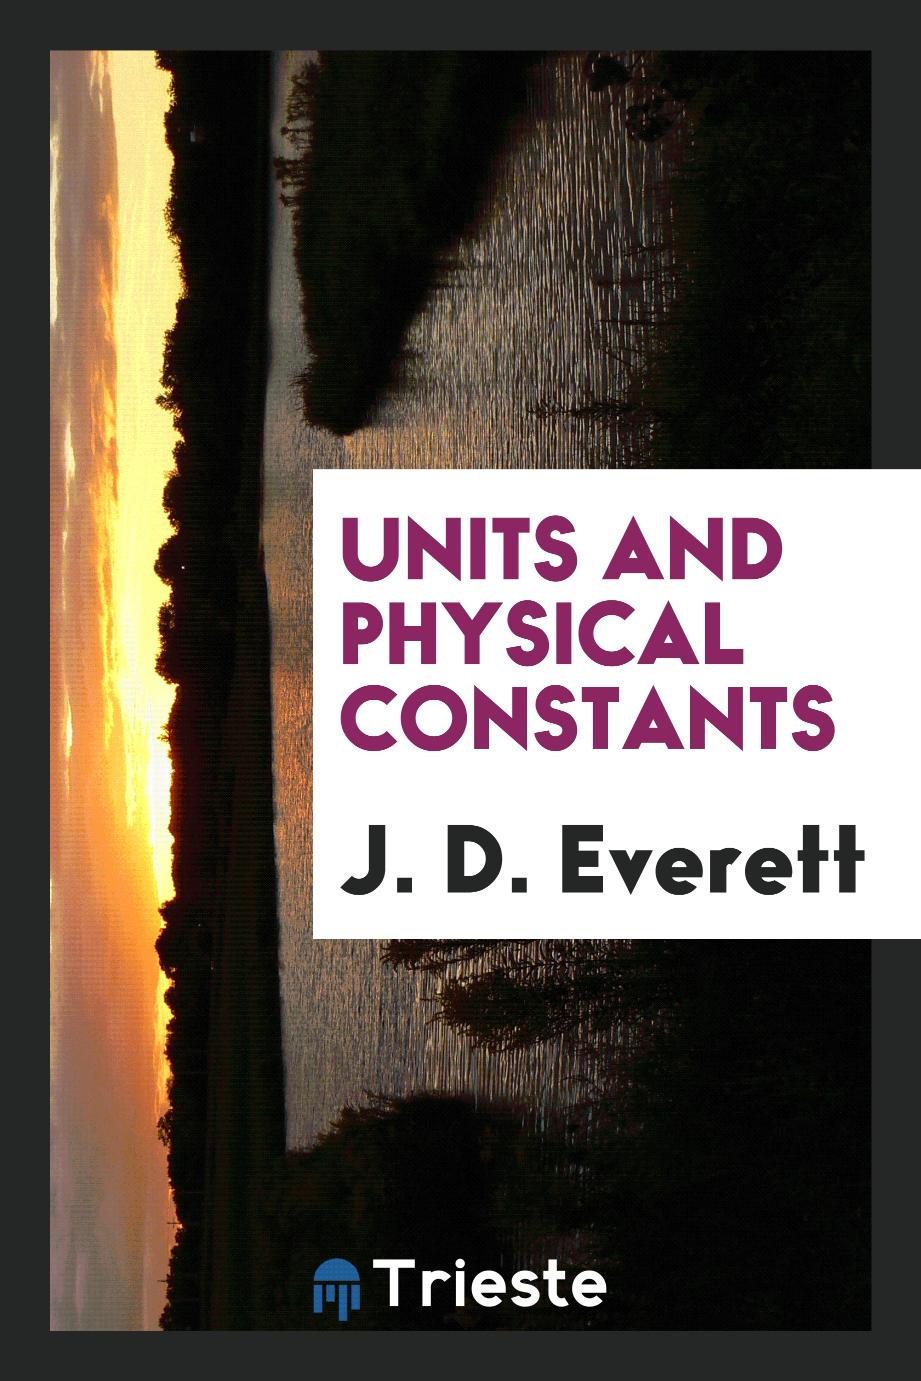 Units and physical constants